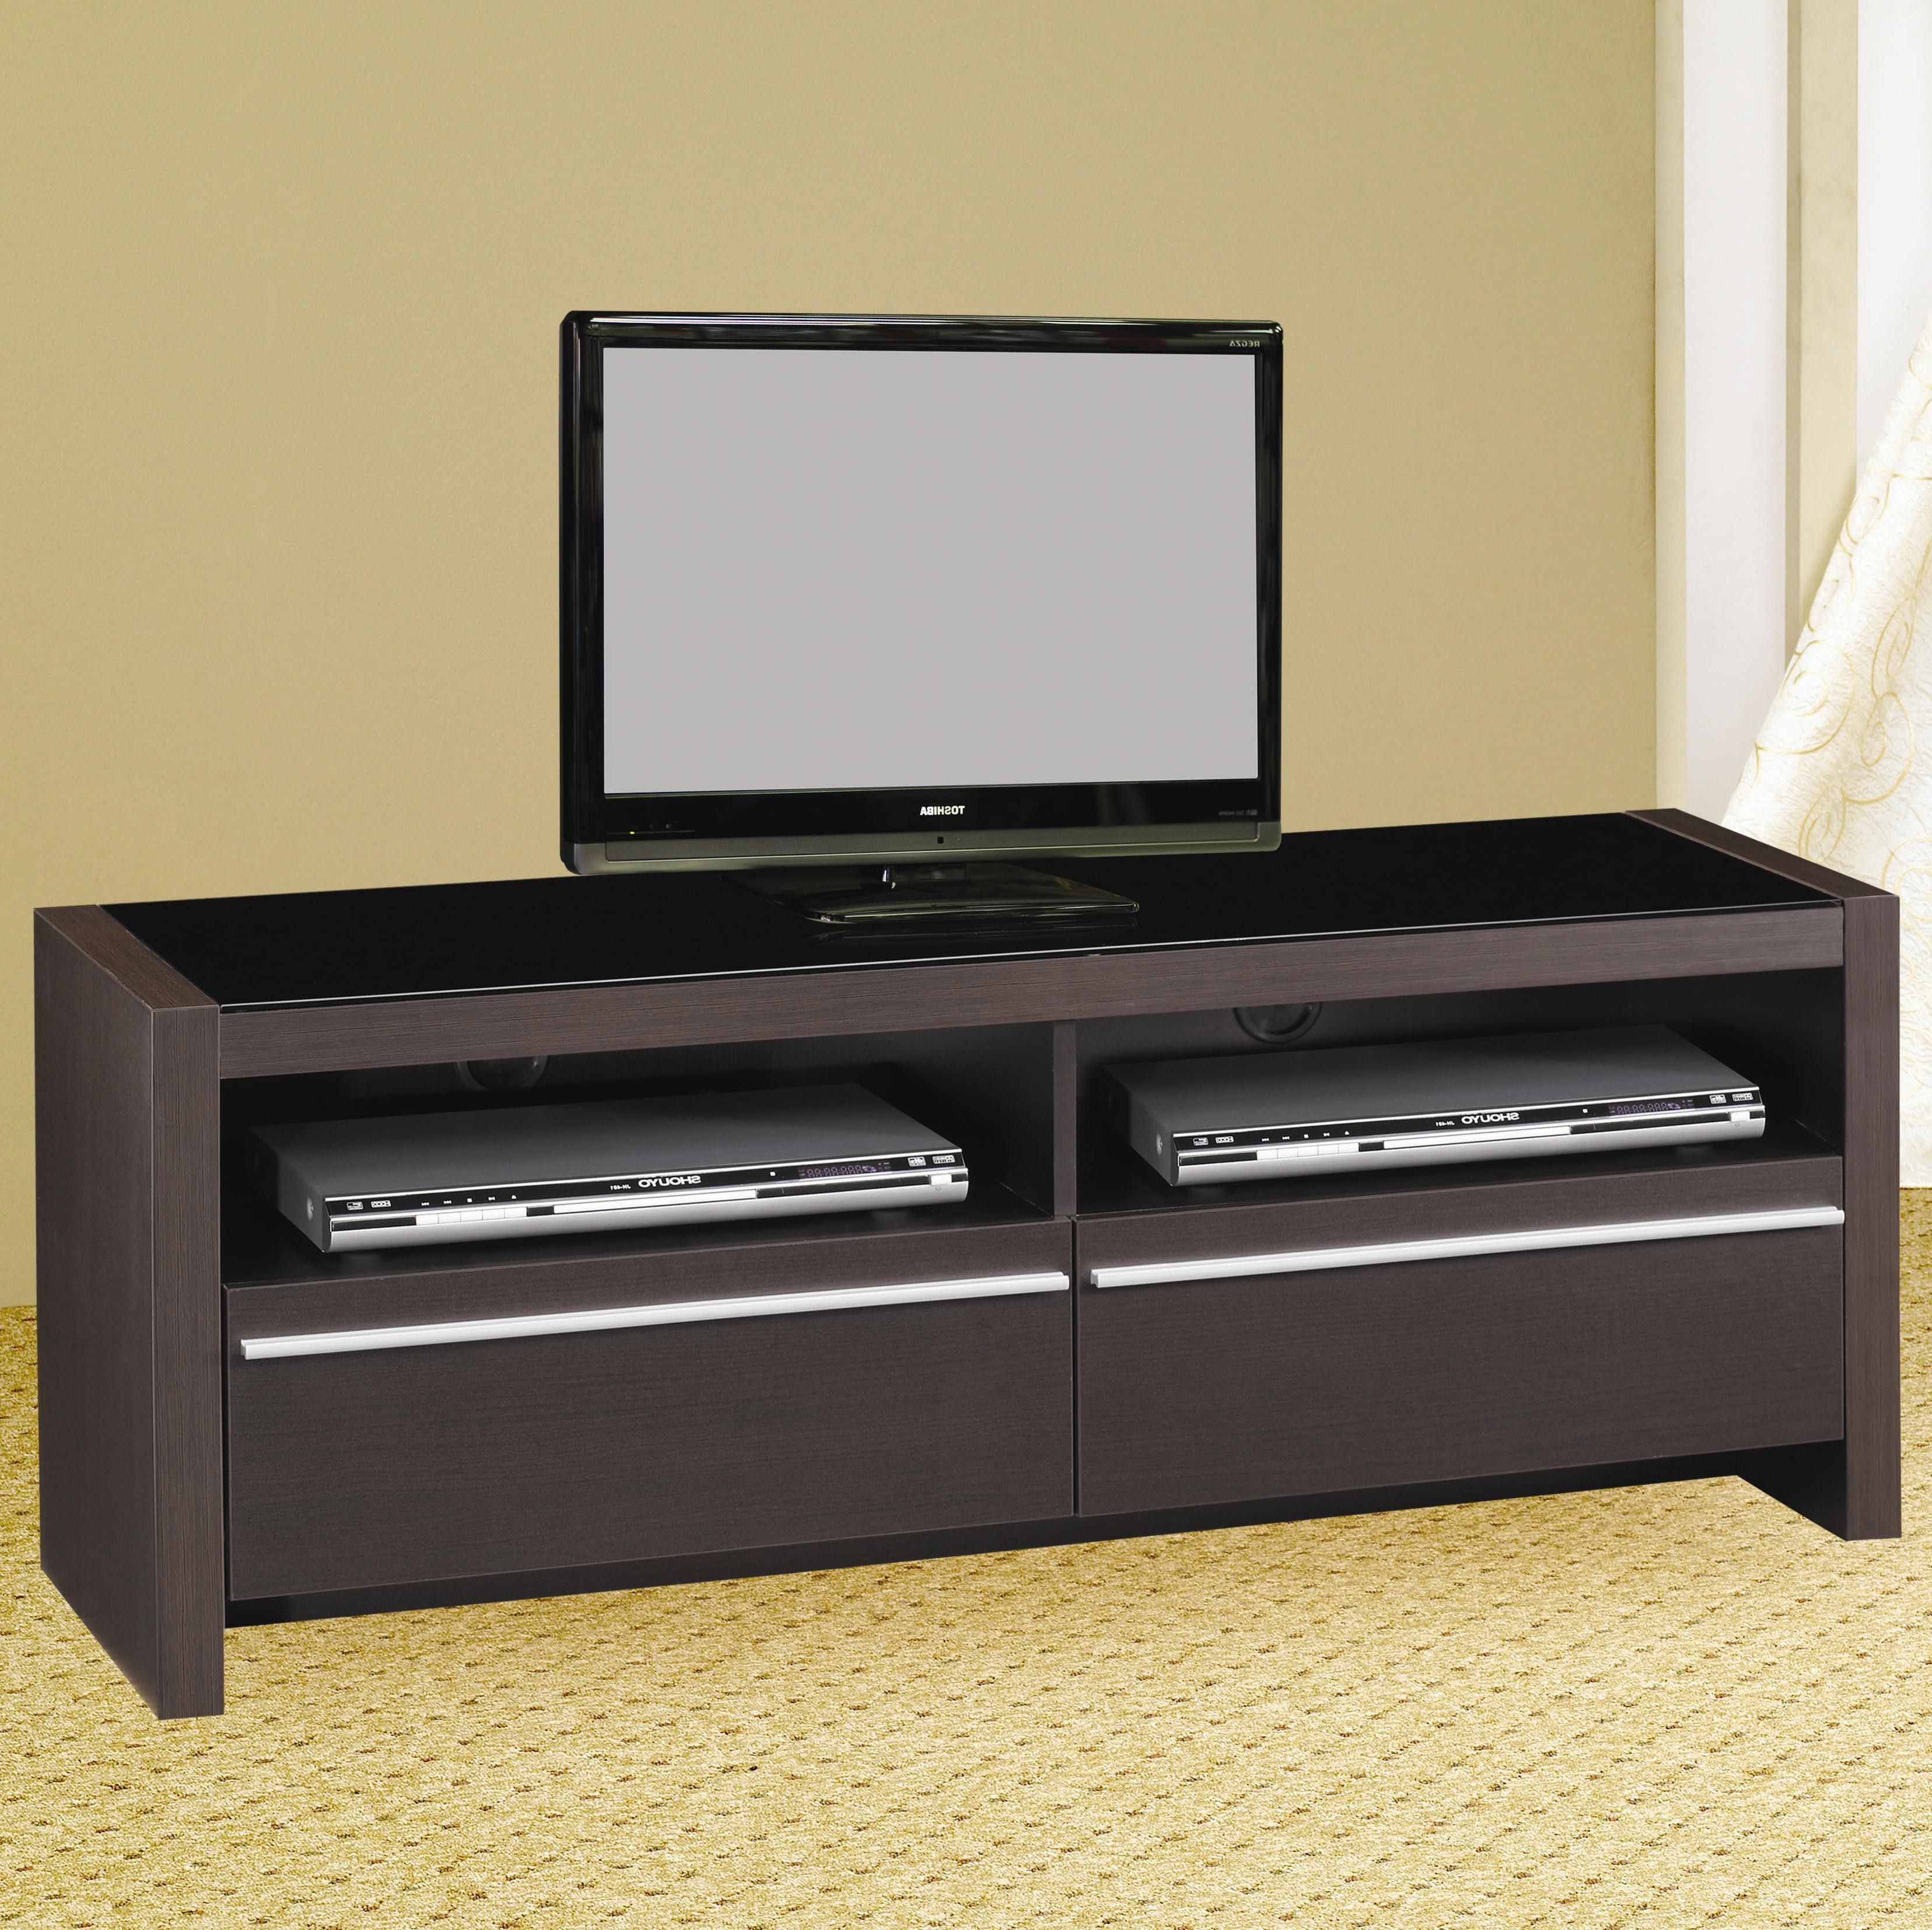 2017 Tv Stands With Drawers And Shelves Pertaining To Tv Stands Contemporary Media Console With Shelves And Drawers Lowest (View 13 of 20)